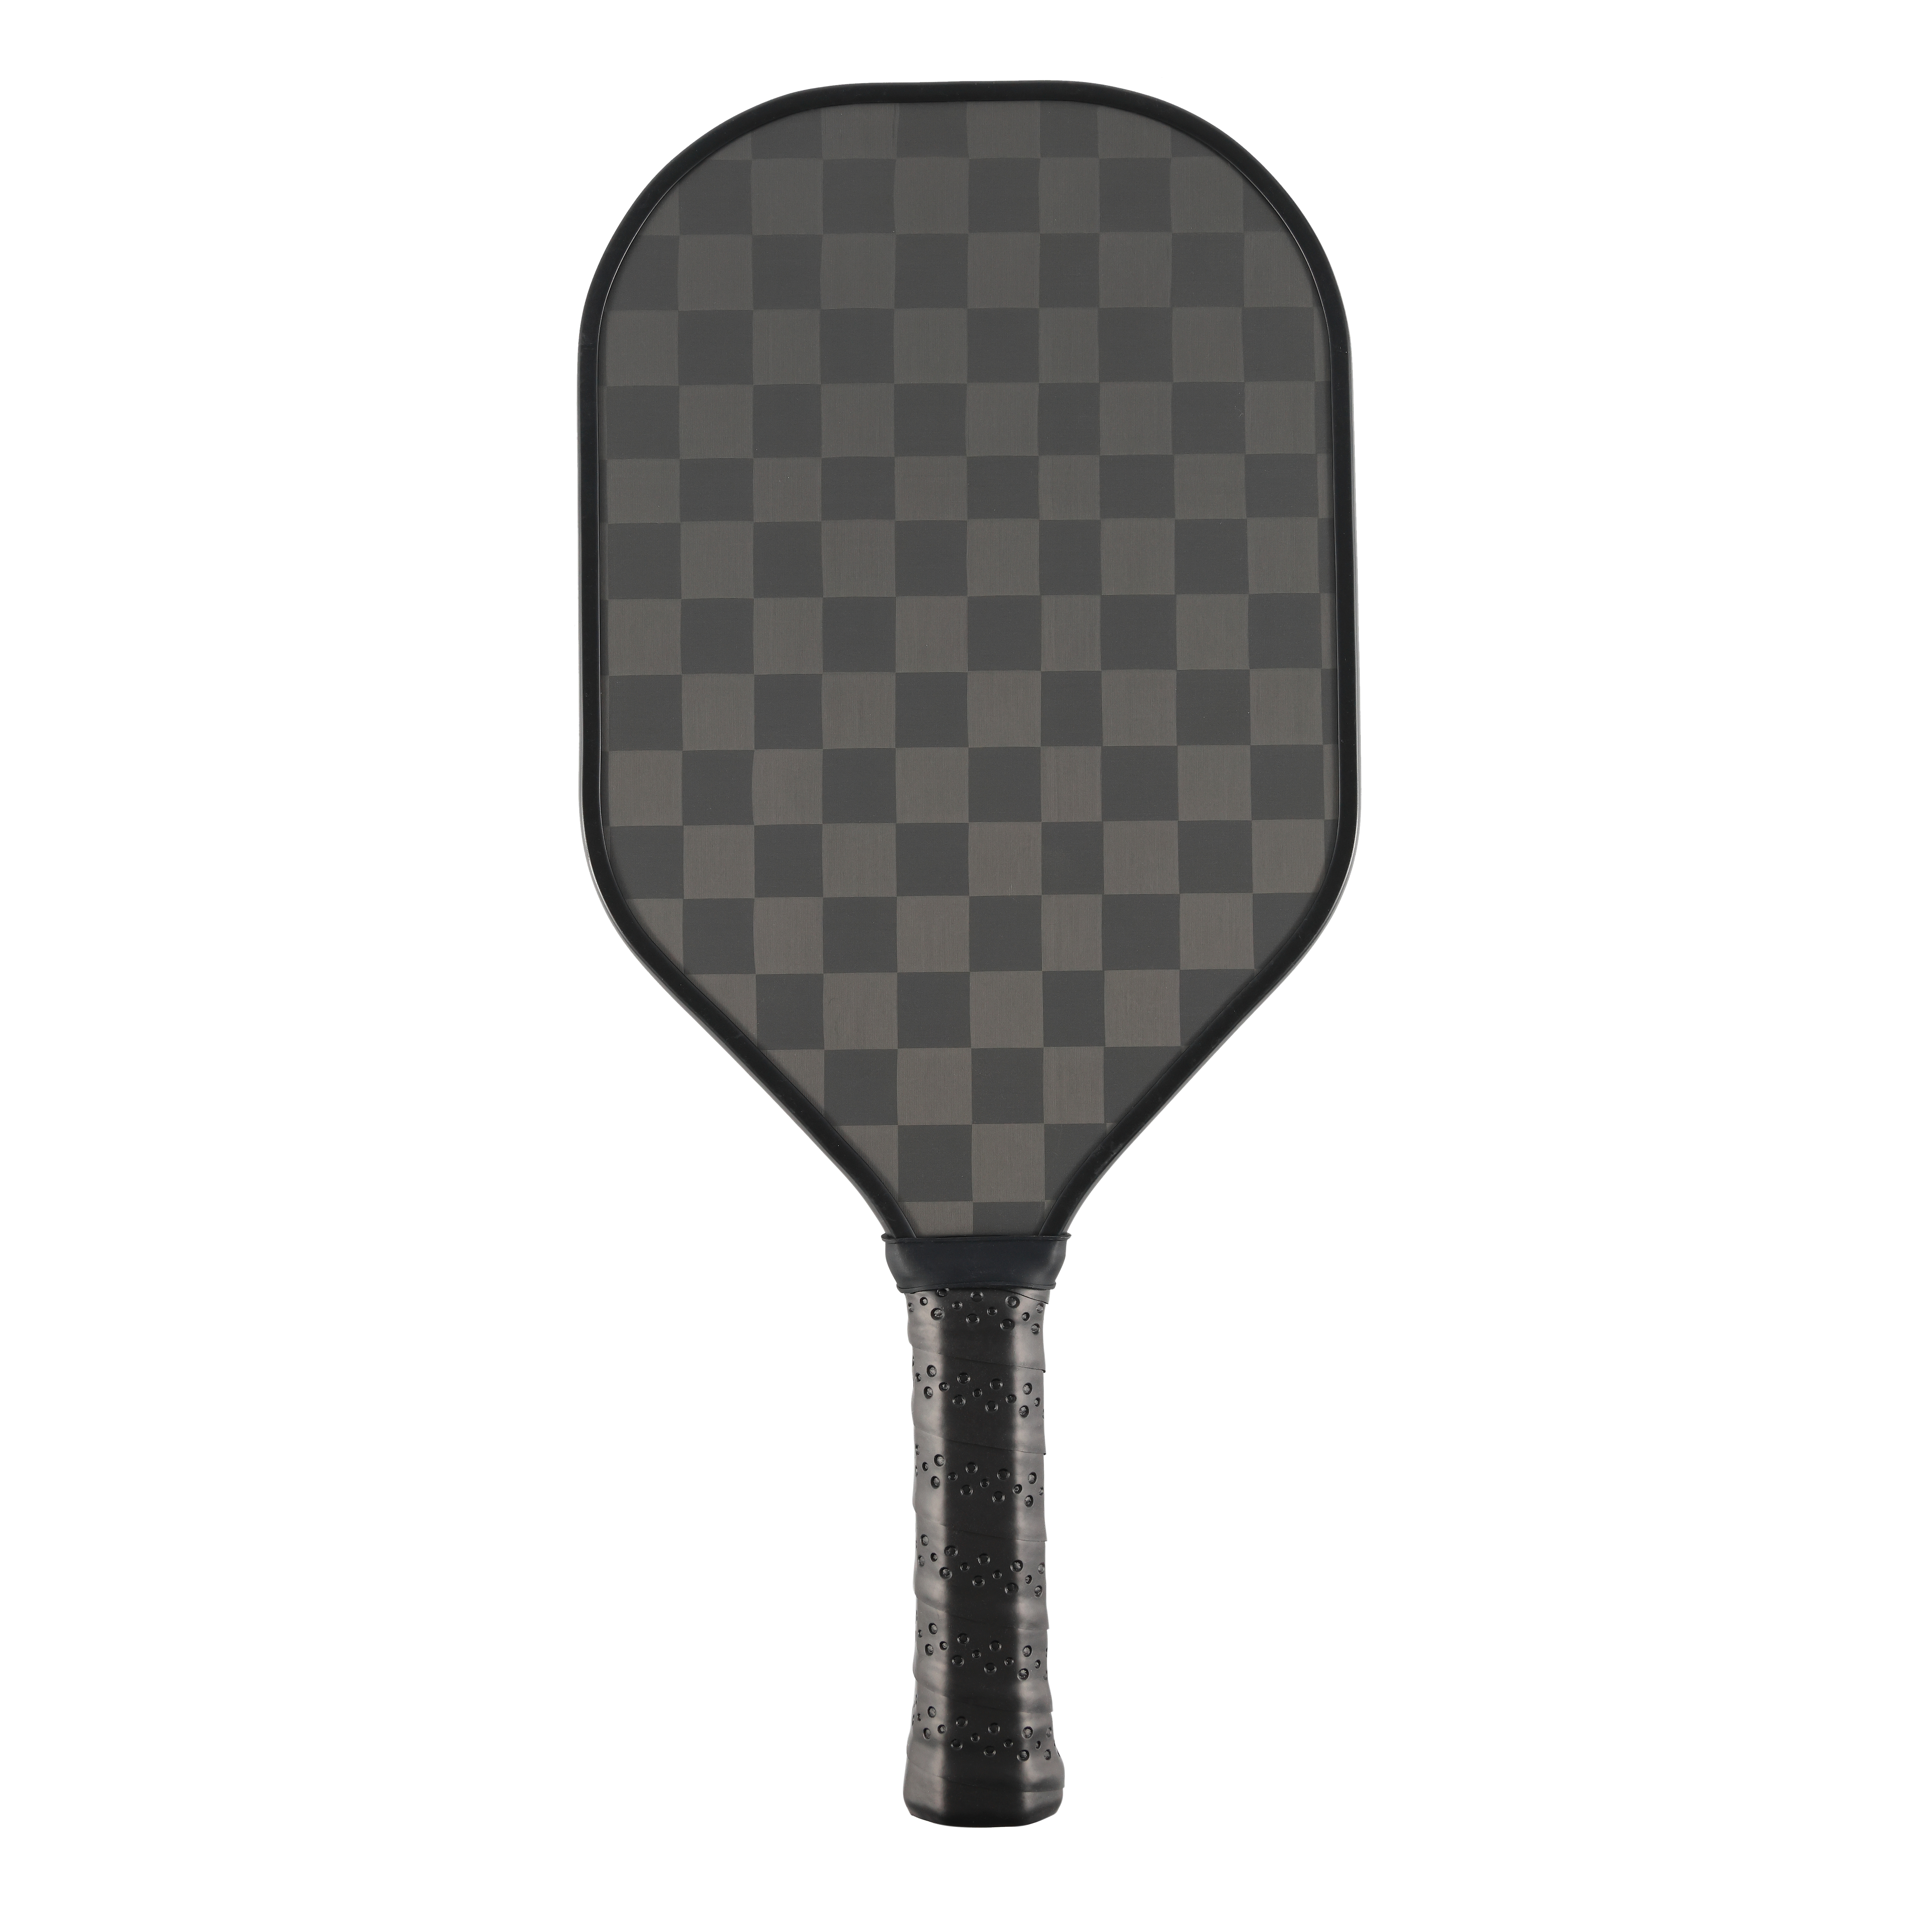 What Are the Key Features to Look for in a Pickleball Paddle?